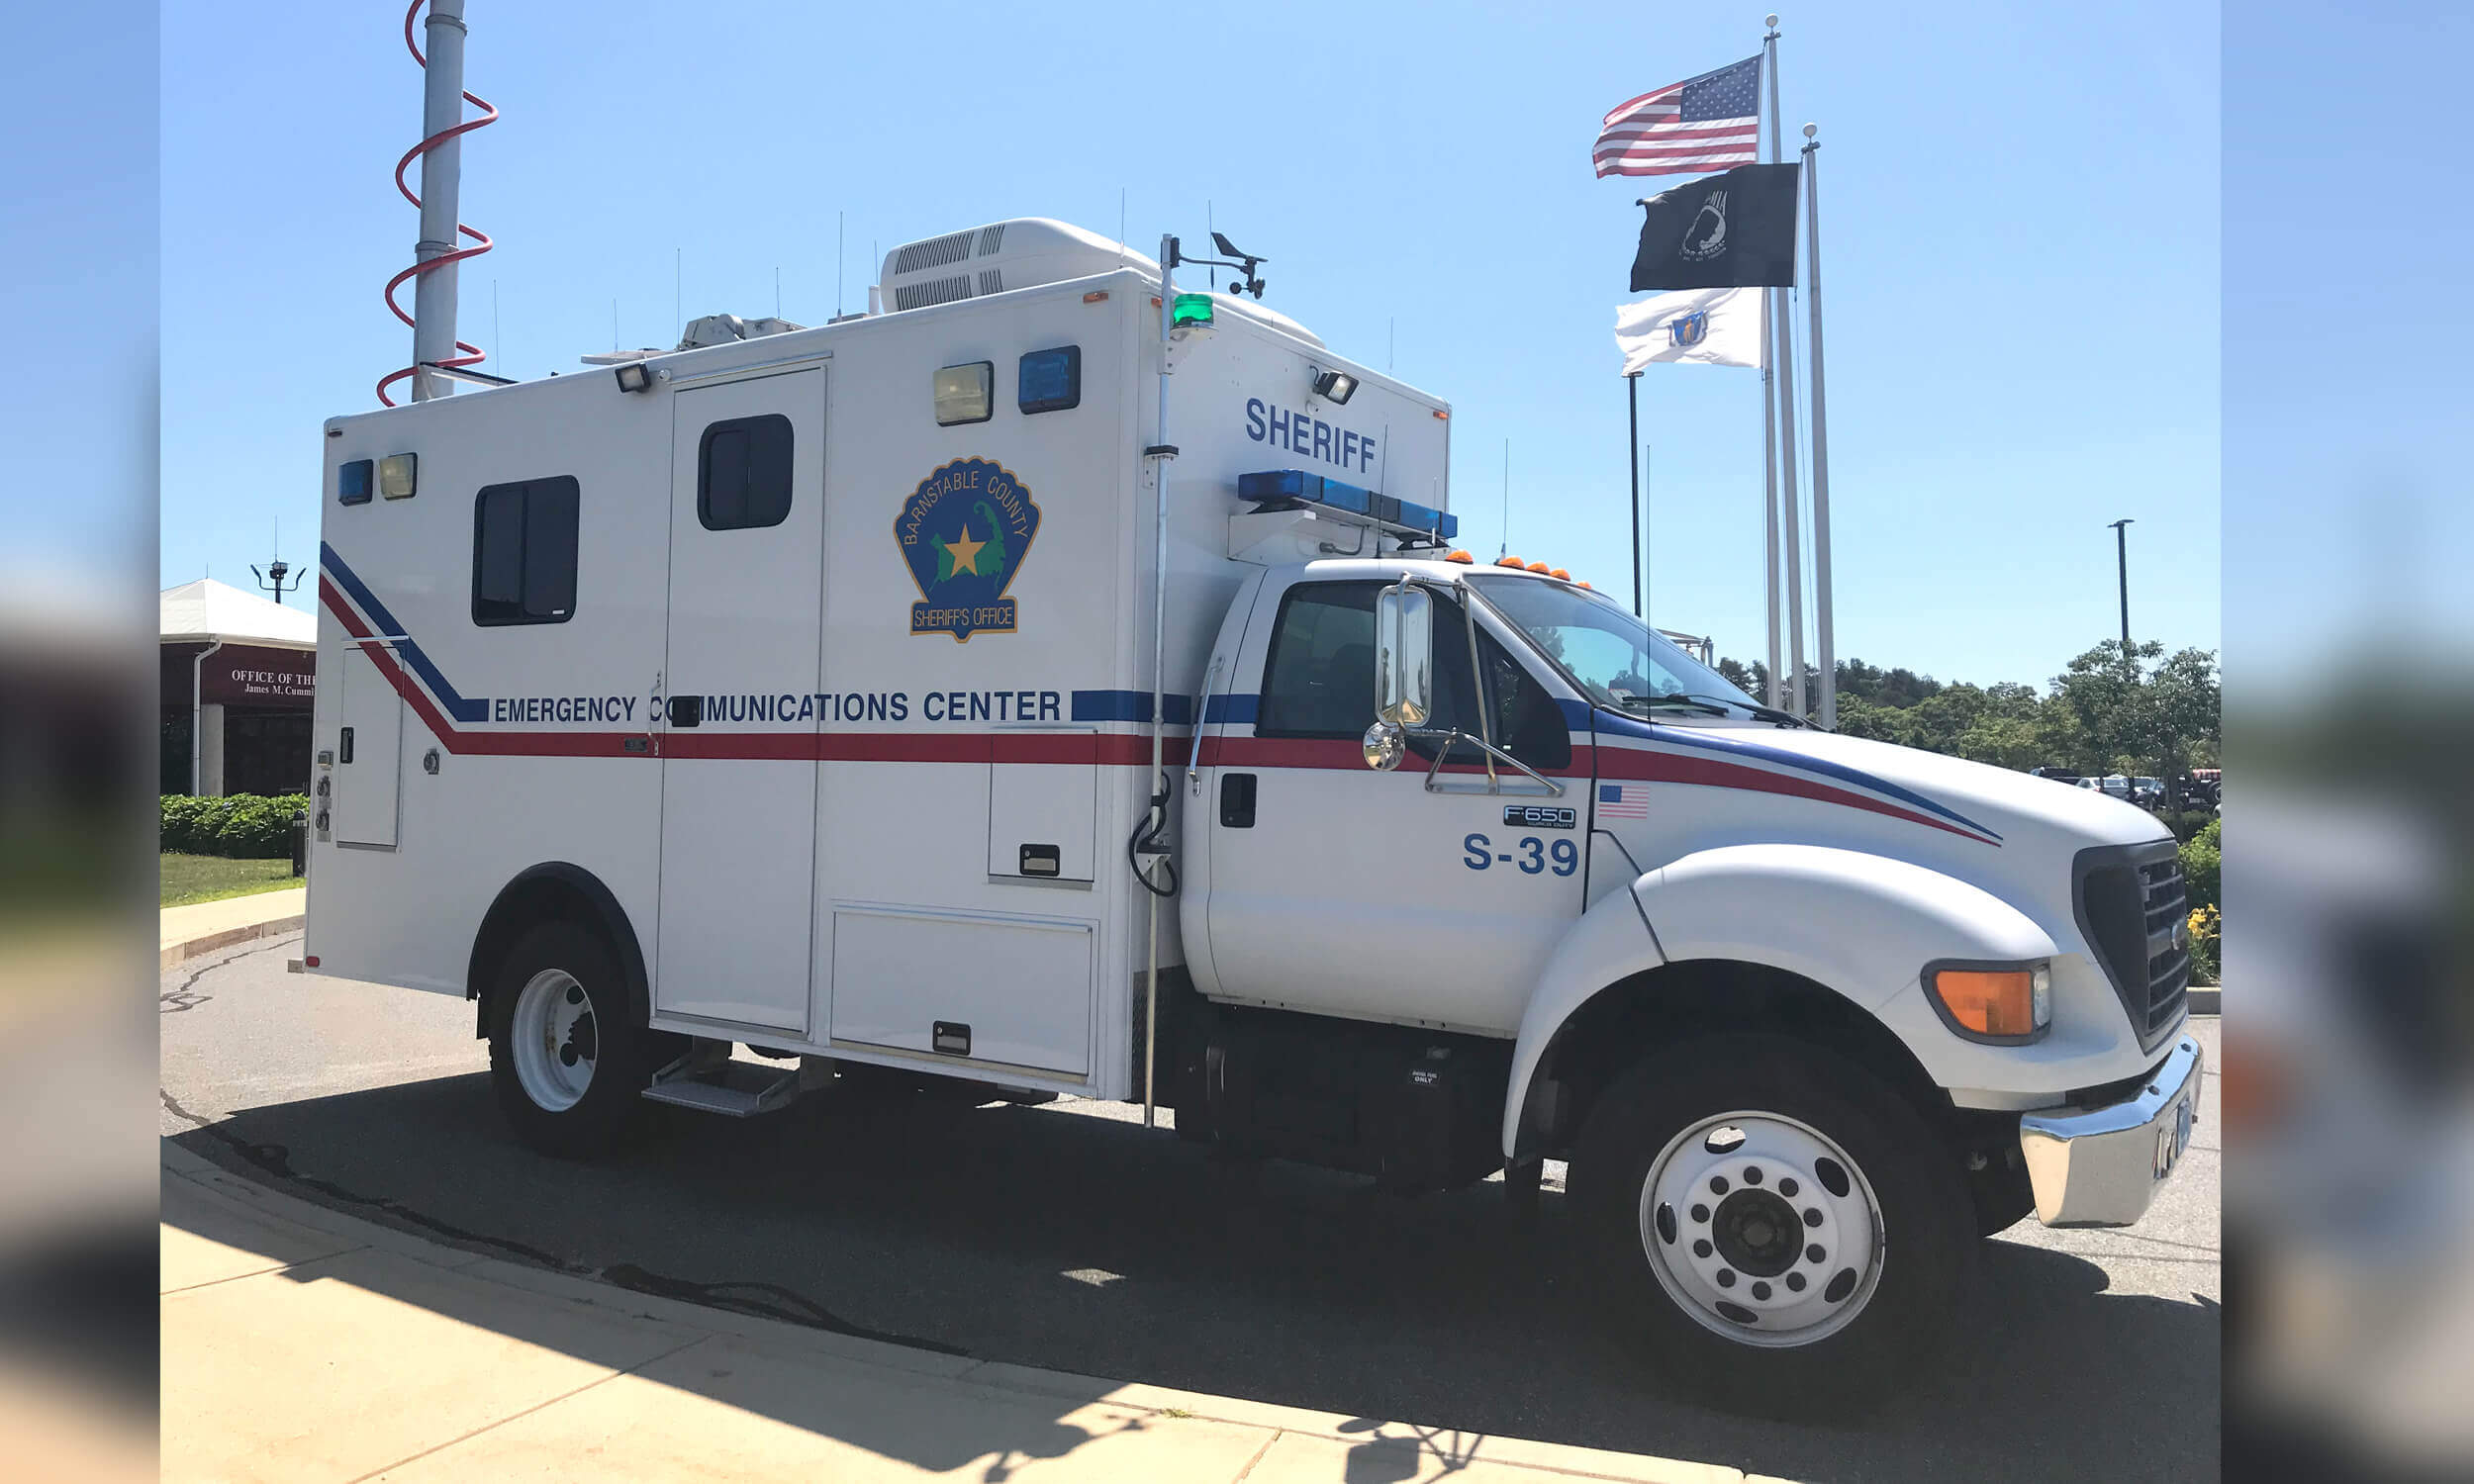 Mobile Command Center - Emergency Communications Center for Barnstable County